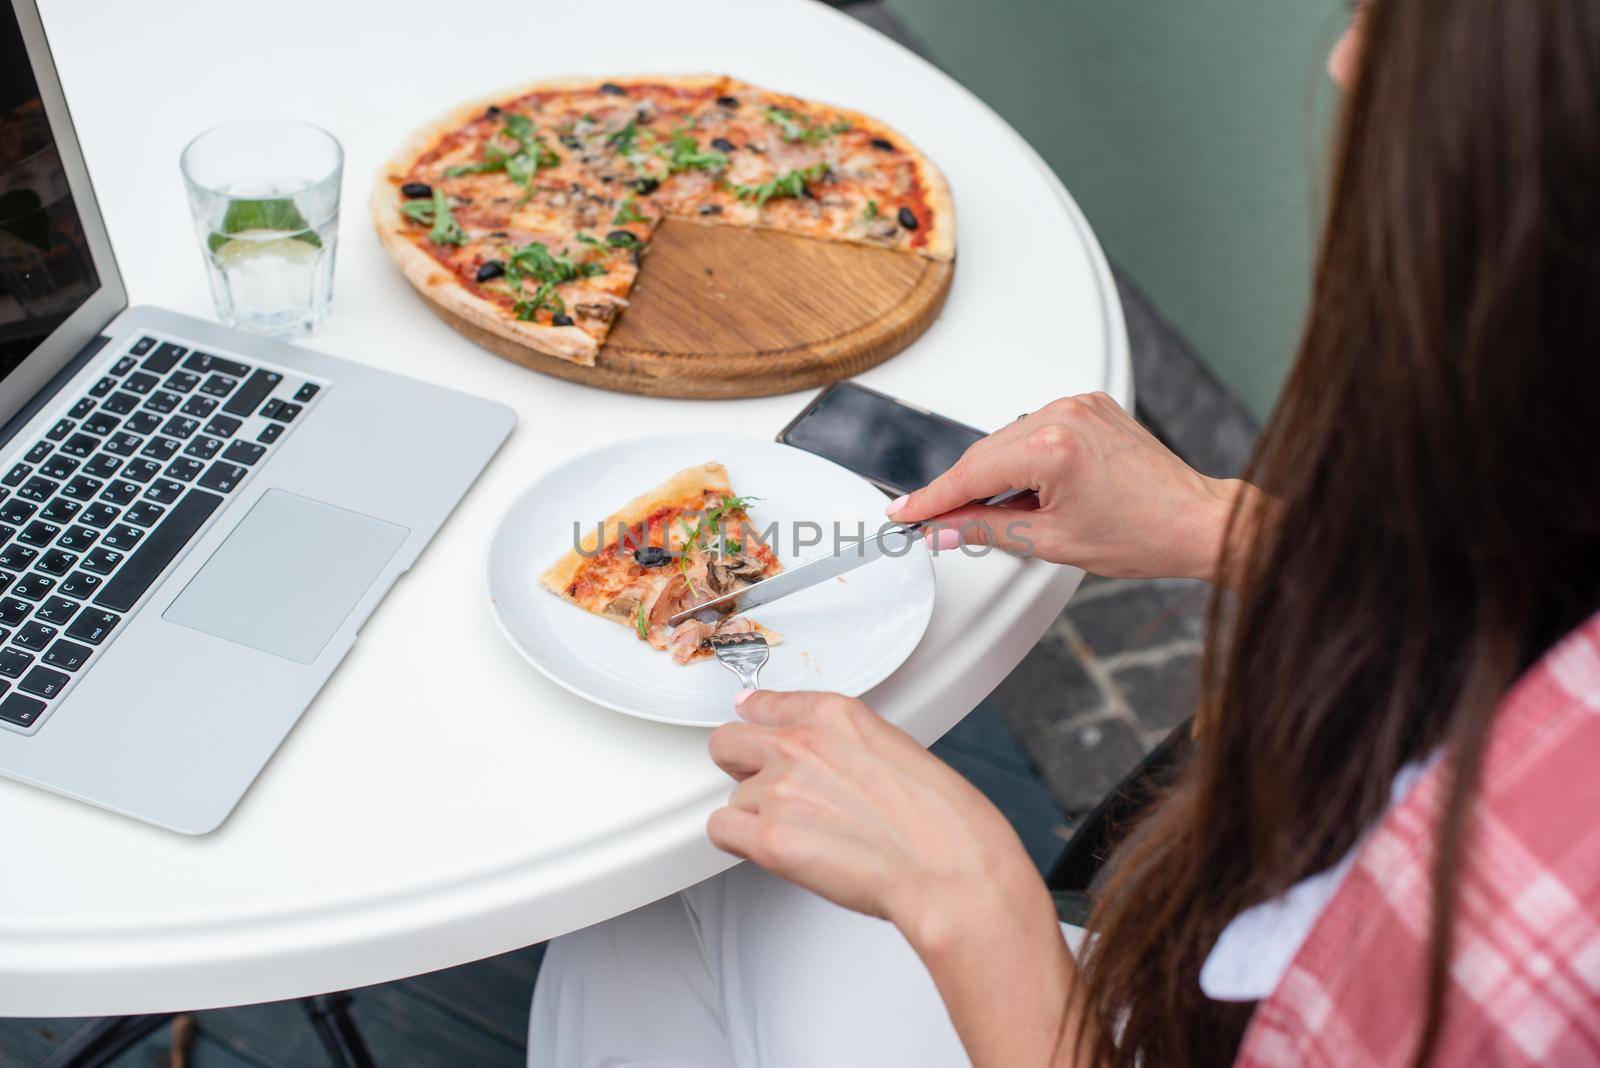 Top view of business woman working on a table at a pizza restaurant